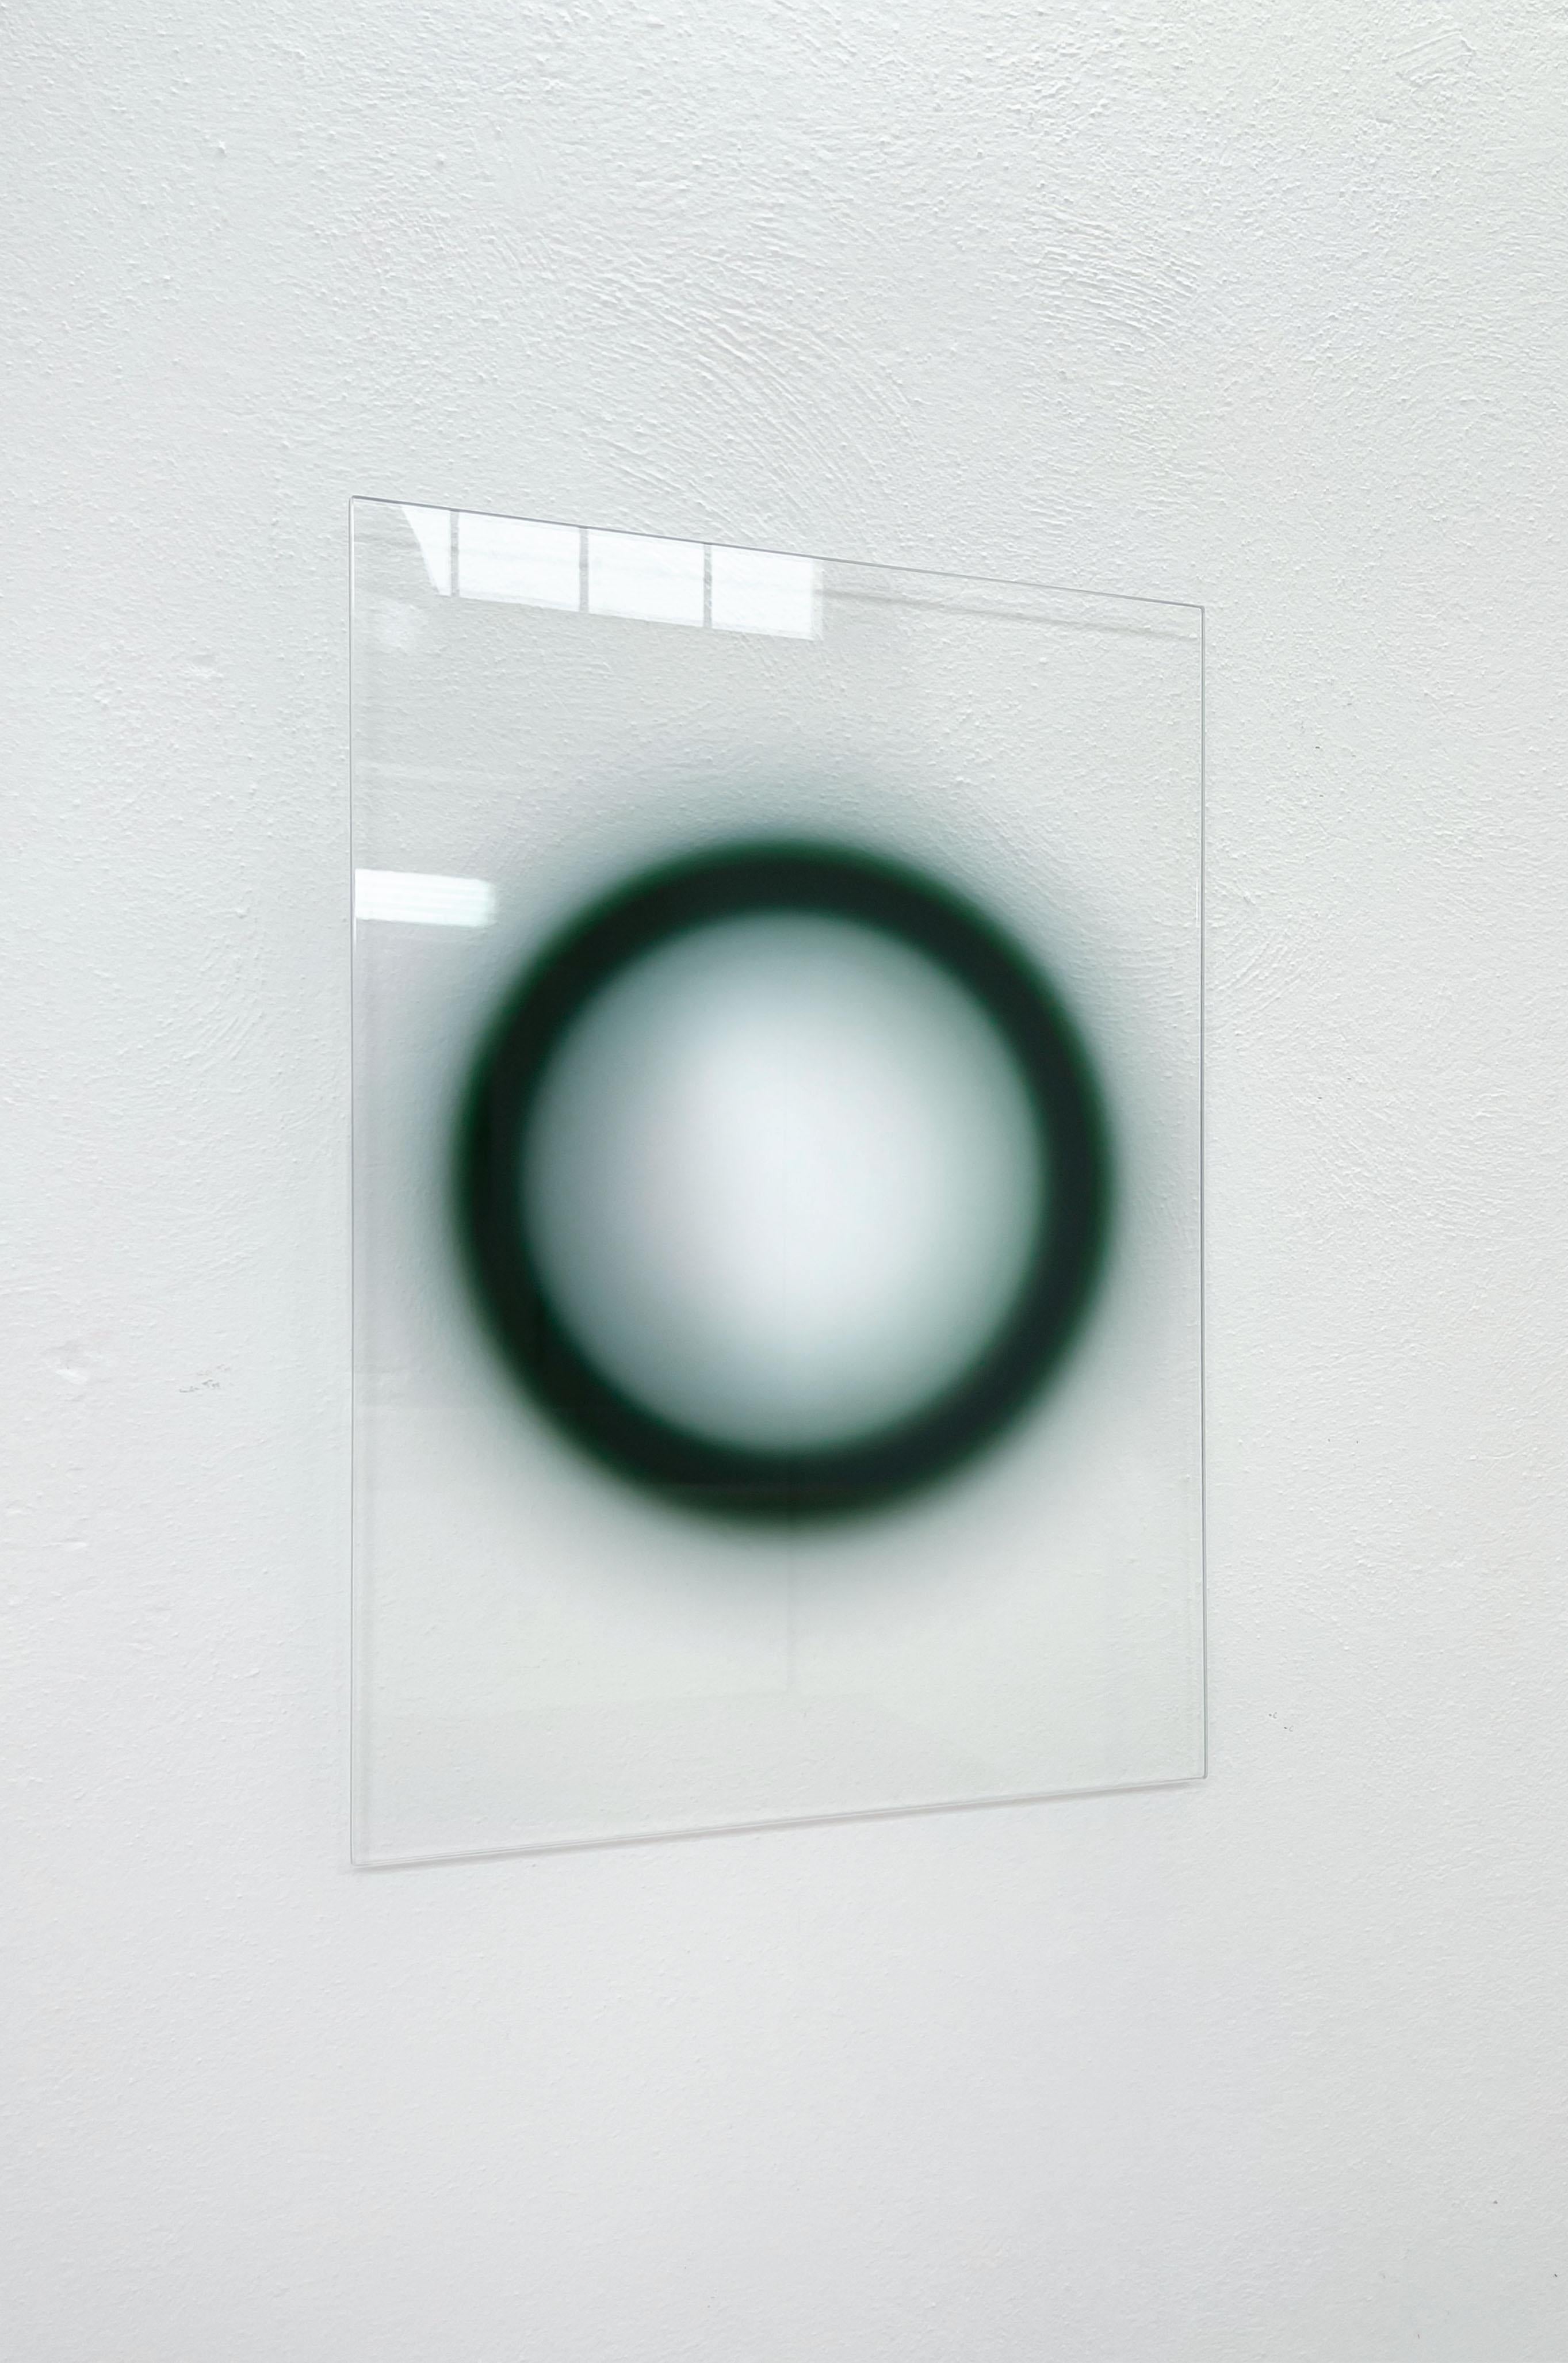 Ol reverse by Celo.1
Dimensions: D 50 x 70 cm
Materials: metal, laminated glass mirror.

Inevitable Future
The mirror is composed by three areas: an outer ring which reflects its surrounding, an inner, dark-shaded ring which engulfs anything